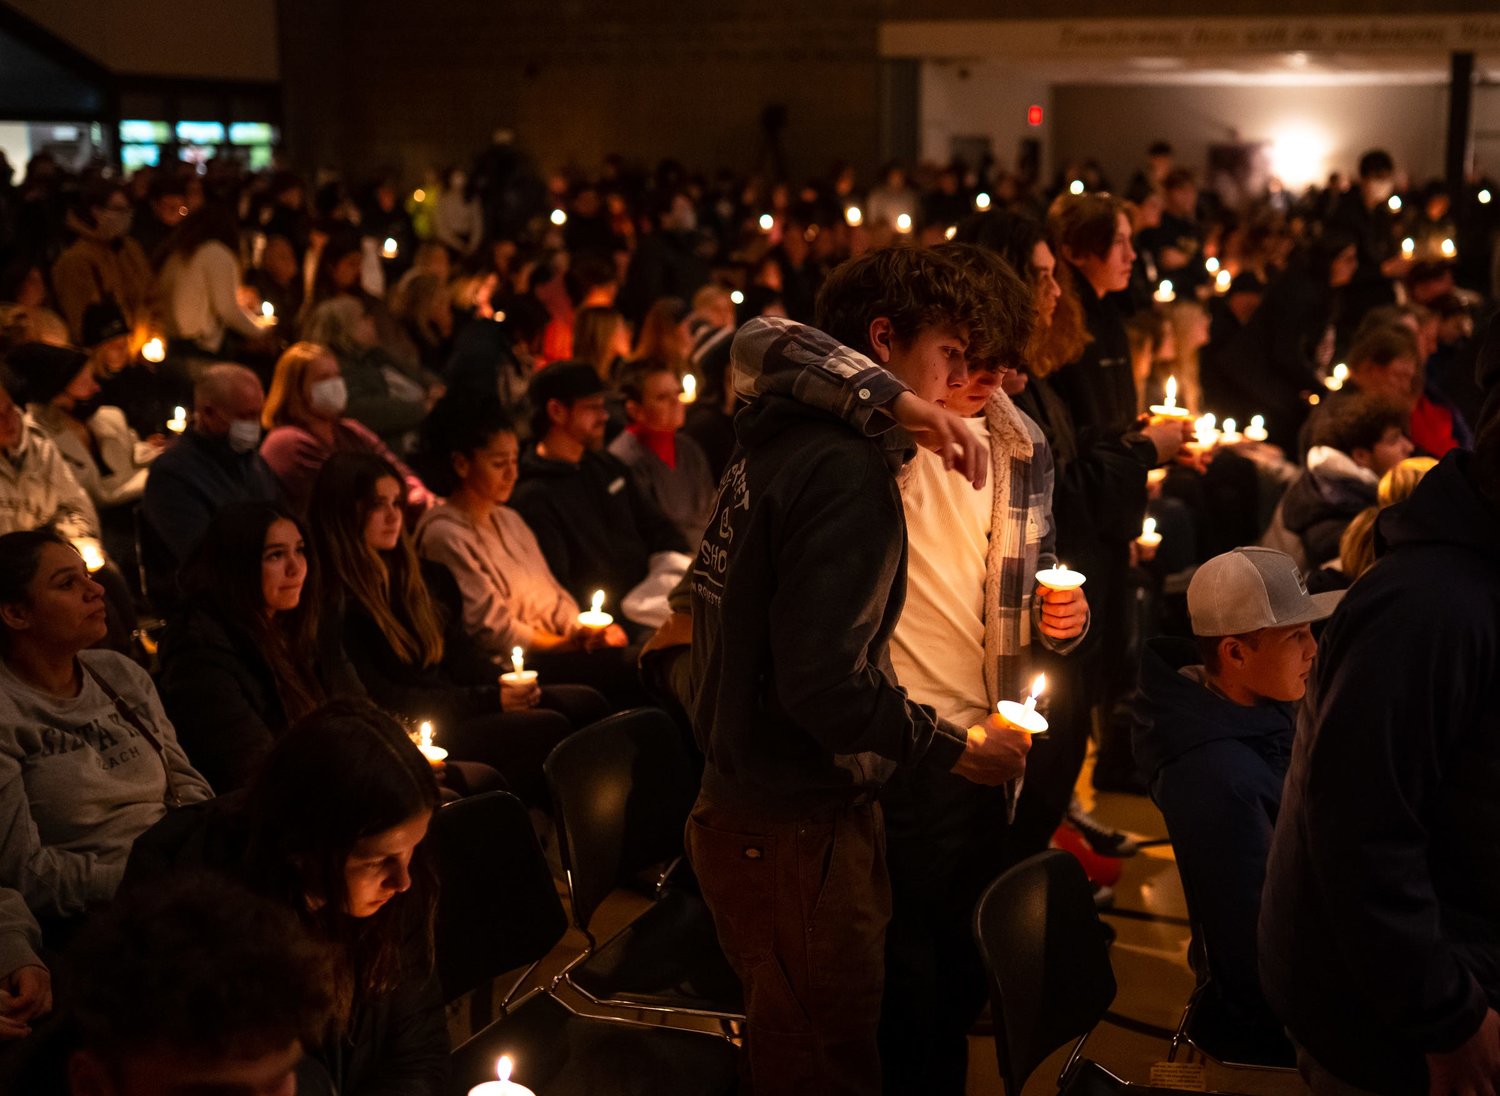 Oxford High School students who were present during the school shooting stand during a prayer vigil at LakePoint Community Church in Oxford, Michigan following an active shooter situation at Oxford High School on Tuesday, Nov. 30, 2021. Police took a suspected shooter into custody and there were multiple victims, the Oakland County Sheriff's office said. (Ryan Garza/Detroit Free Press/TNS)